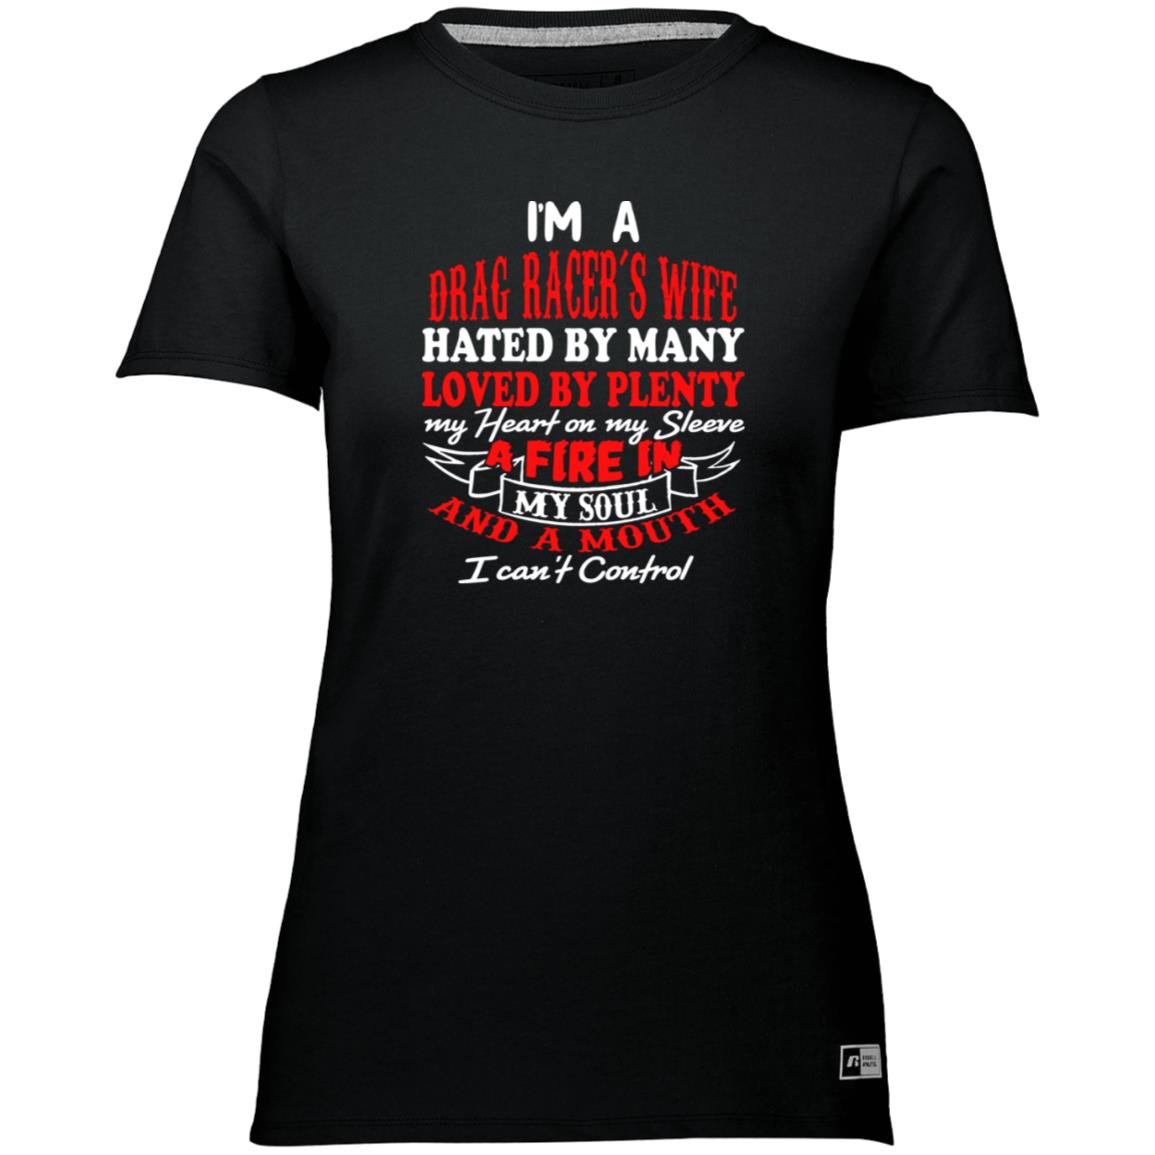 I'm A Drag Racer's Wife Hated By Many Loved By Plenty Ladies’ Essential Dri-Power Tee